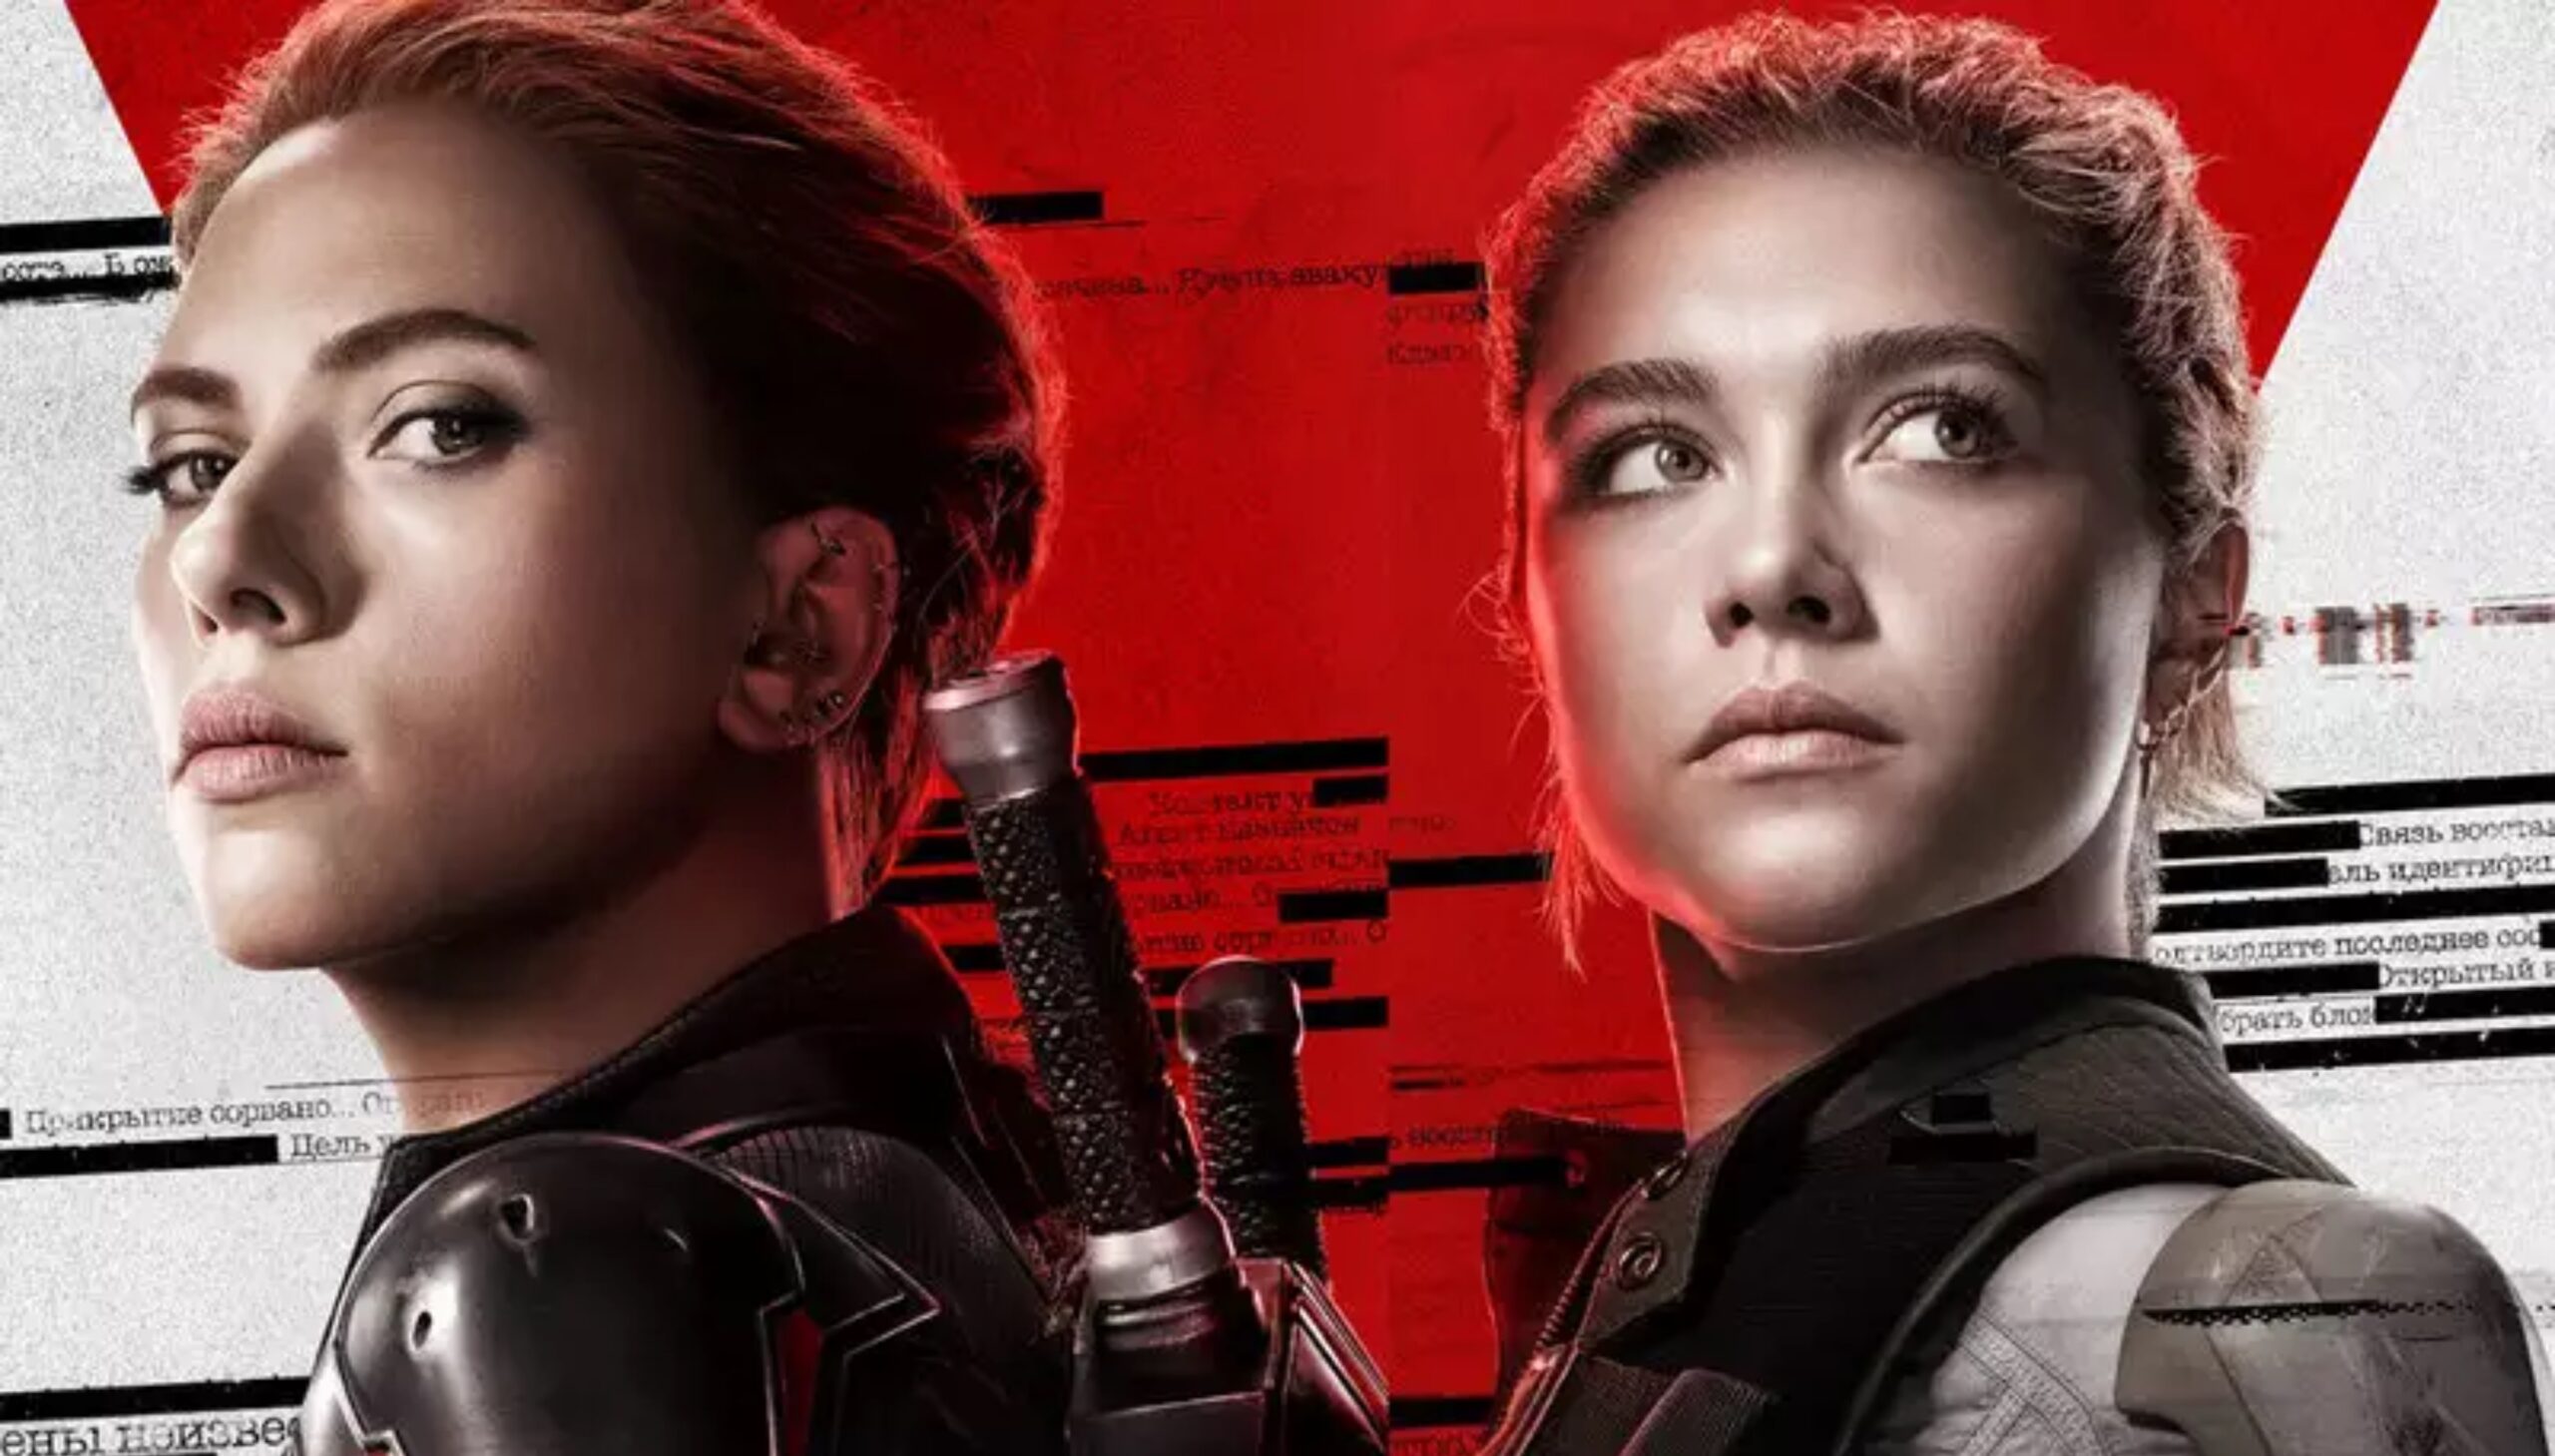 Long-awaited Black Widow will release simultaneously in theaters and on Disney+